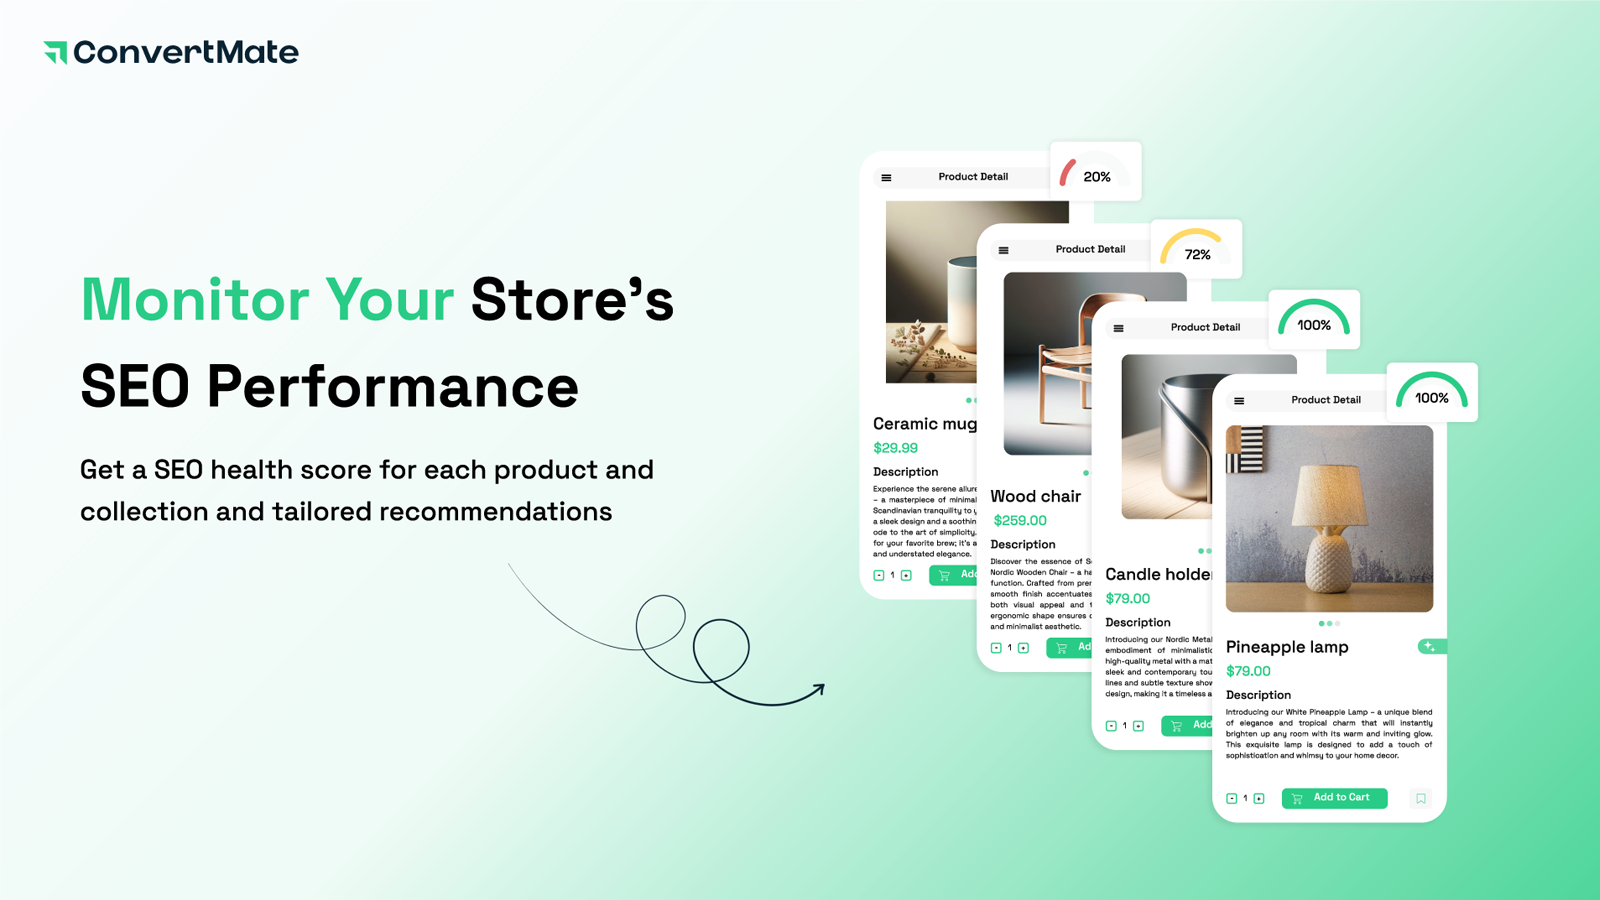 Get a health score for your store with continuous tracking